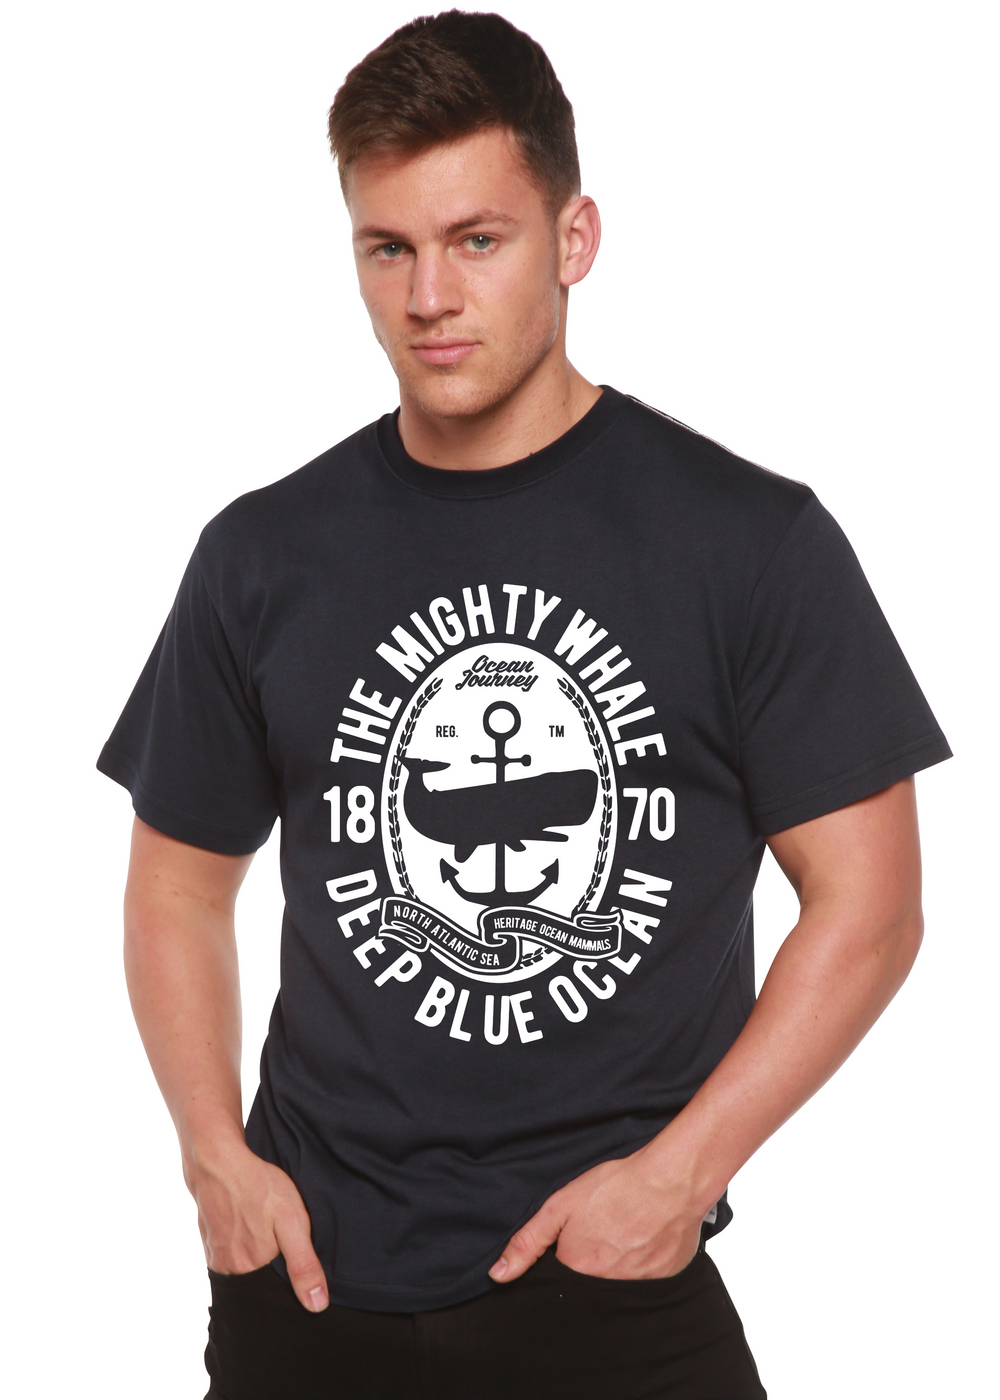 The Mighty Whale men's bamboo tshirt navy blue